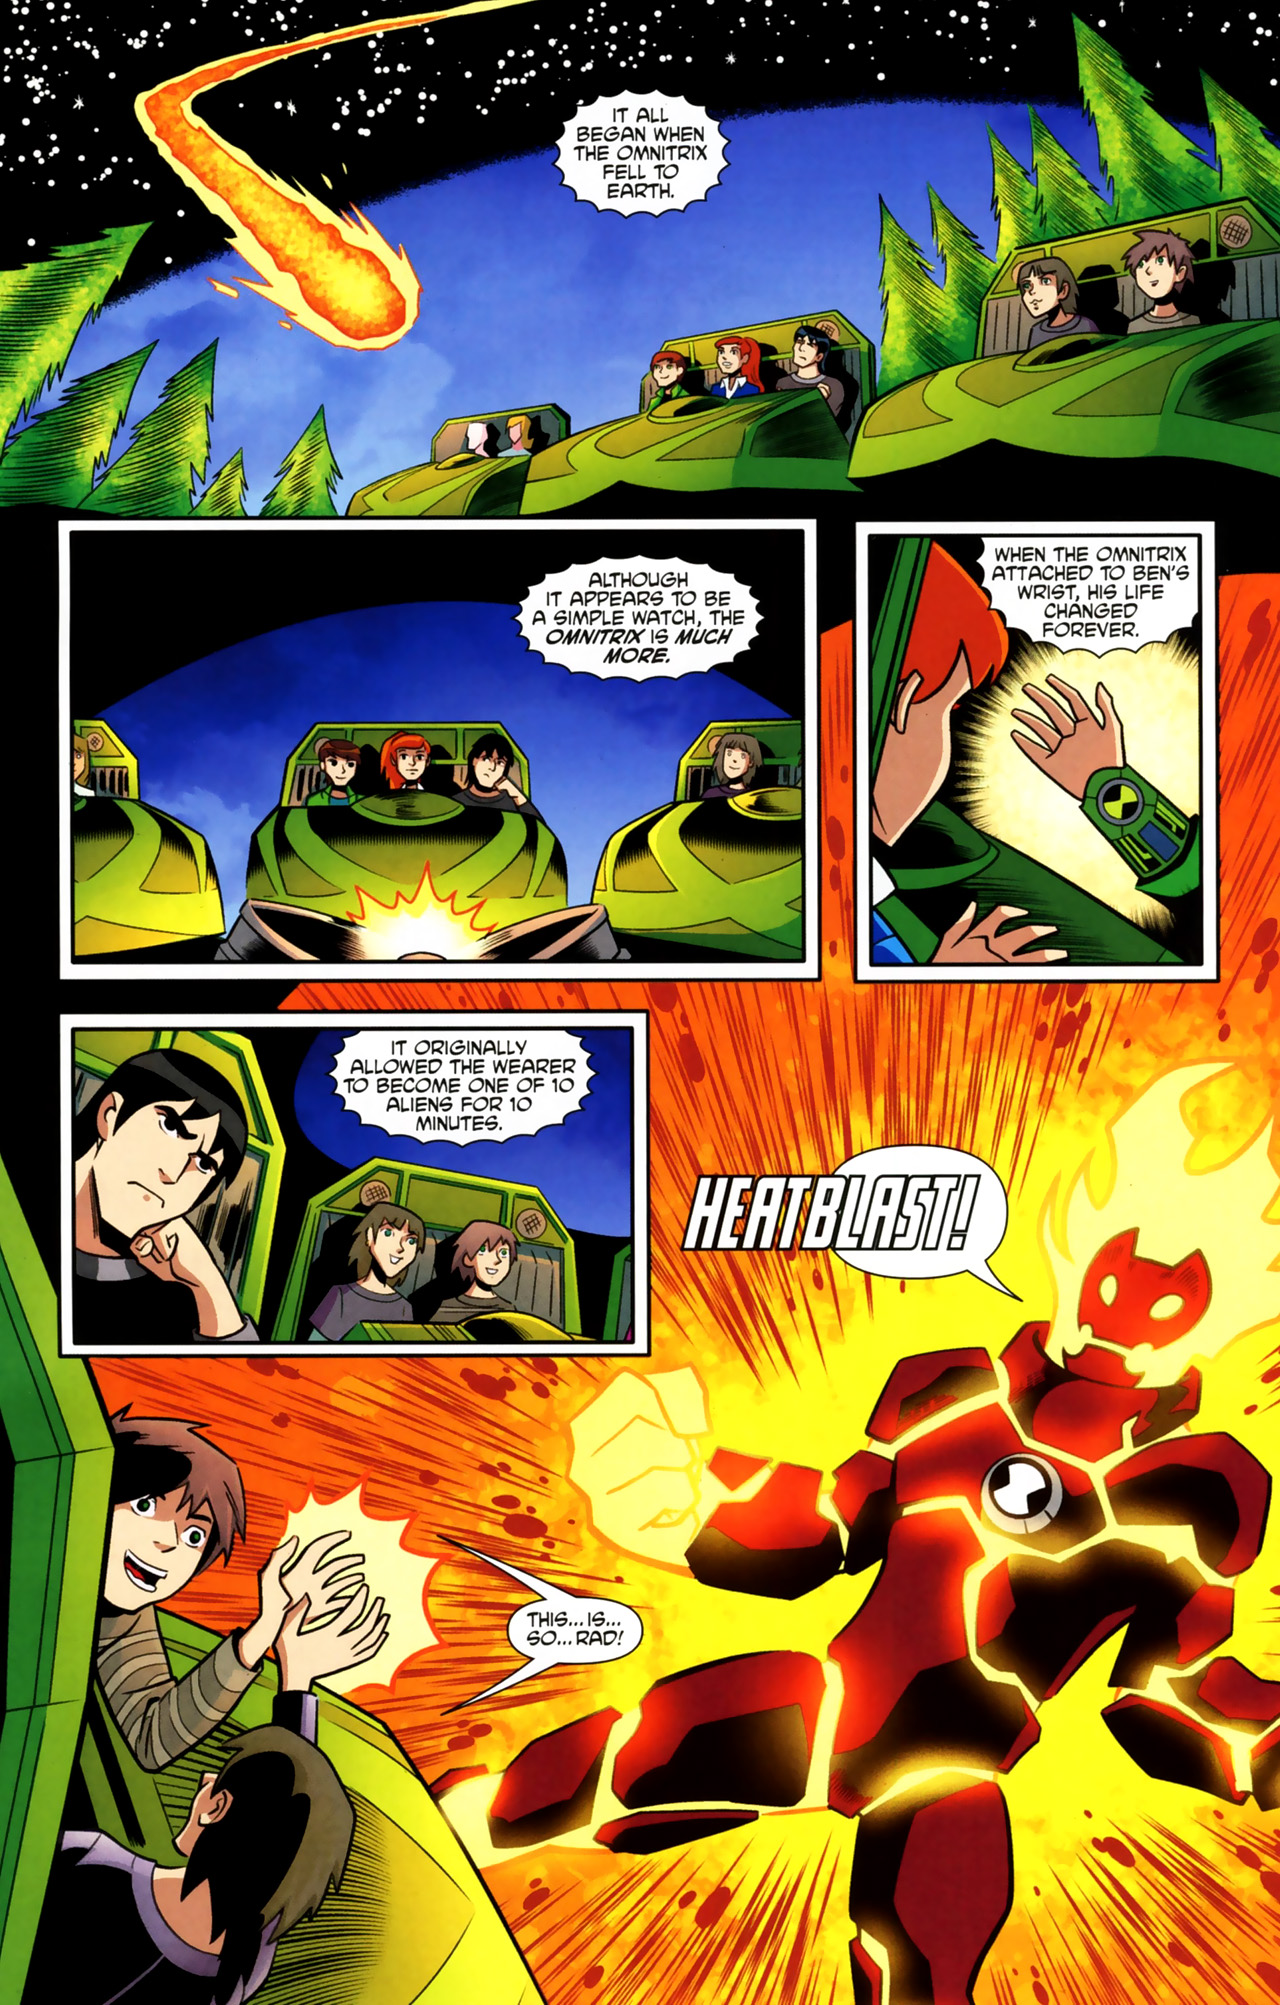 Ben 10 Comic Review nr 37: Cartoon Network Action Pack #33 - A